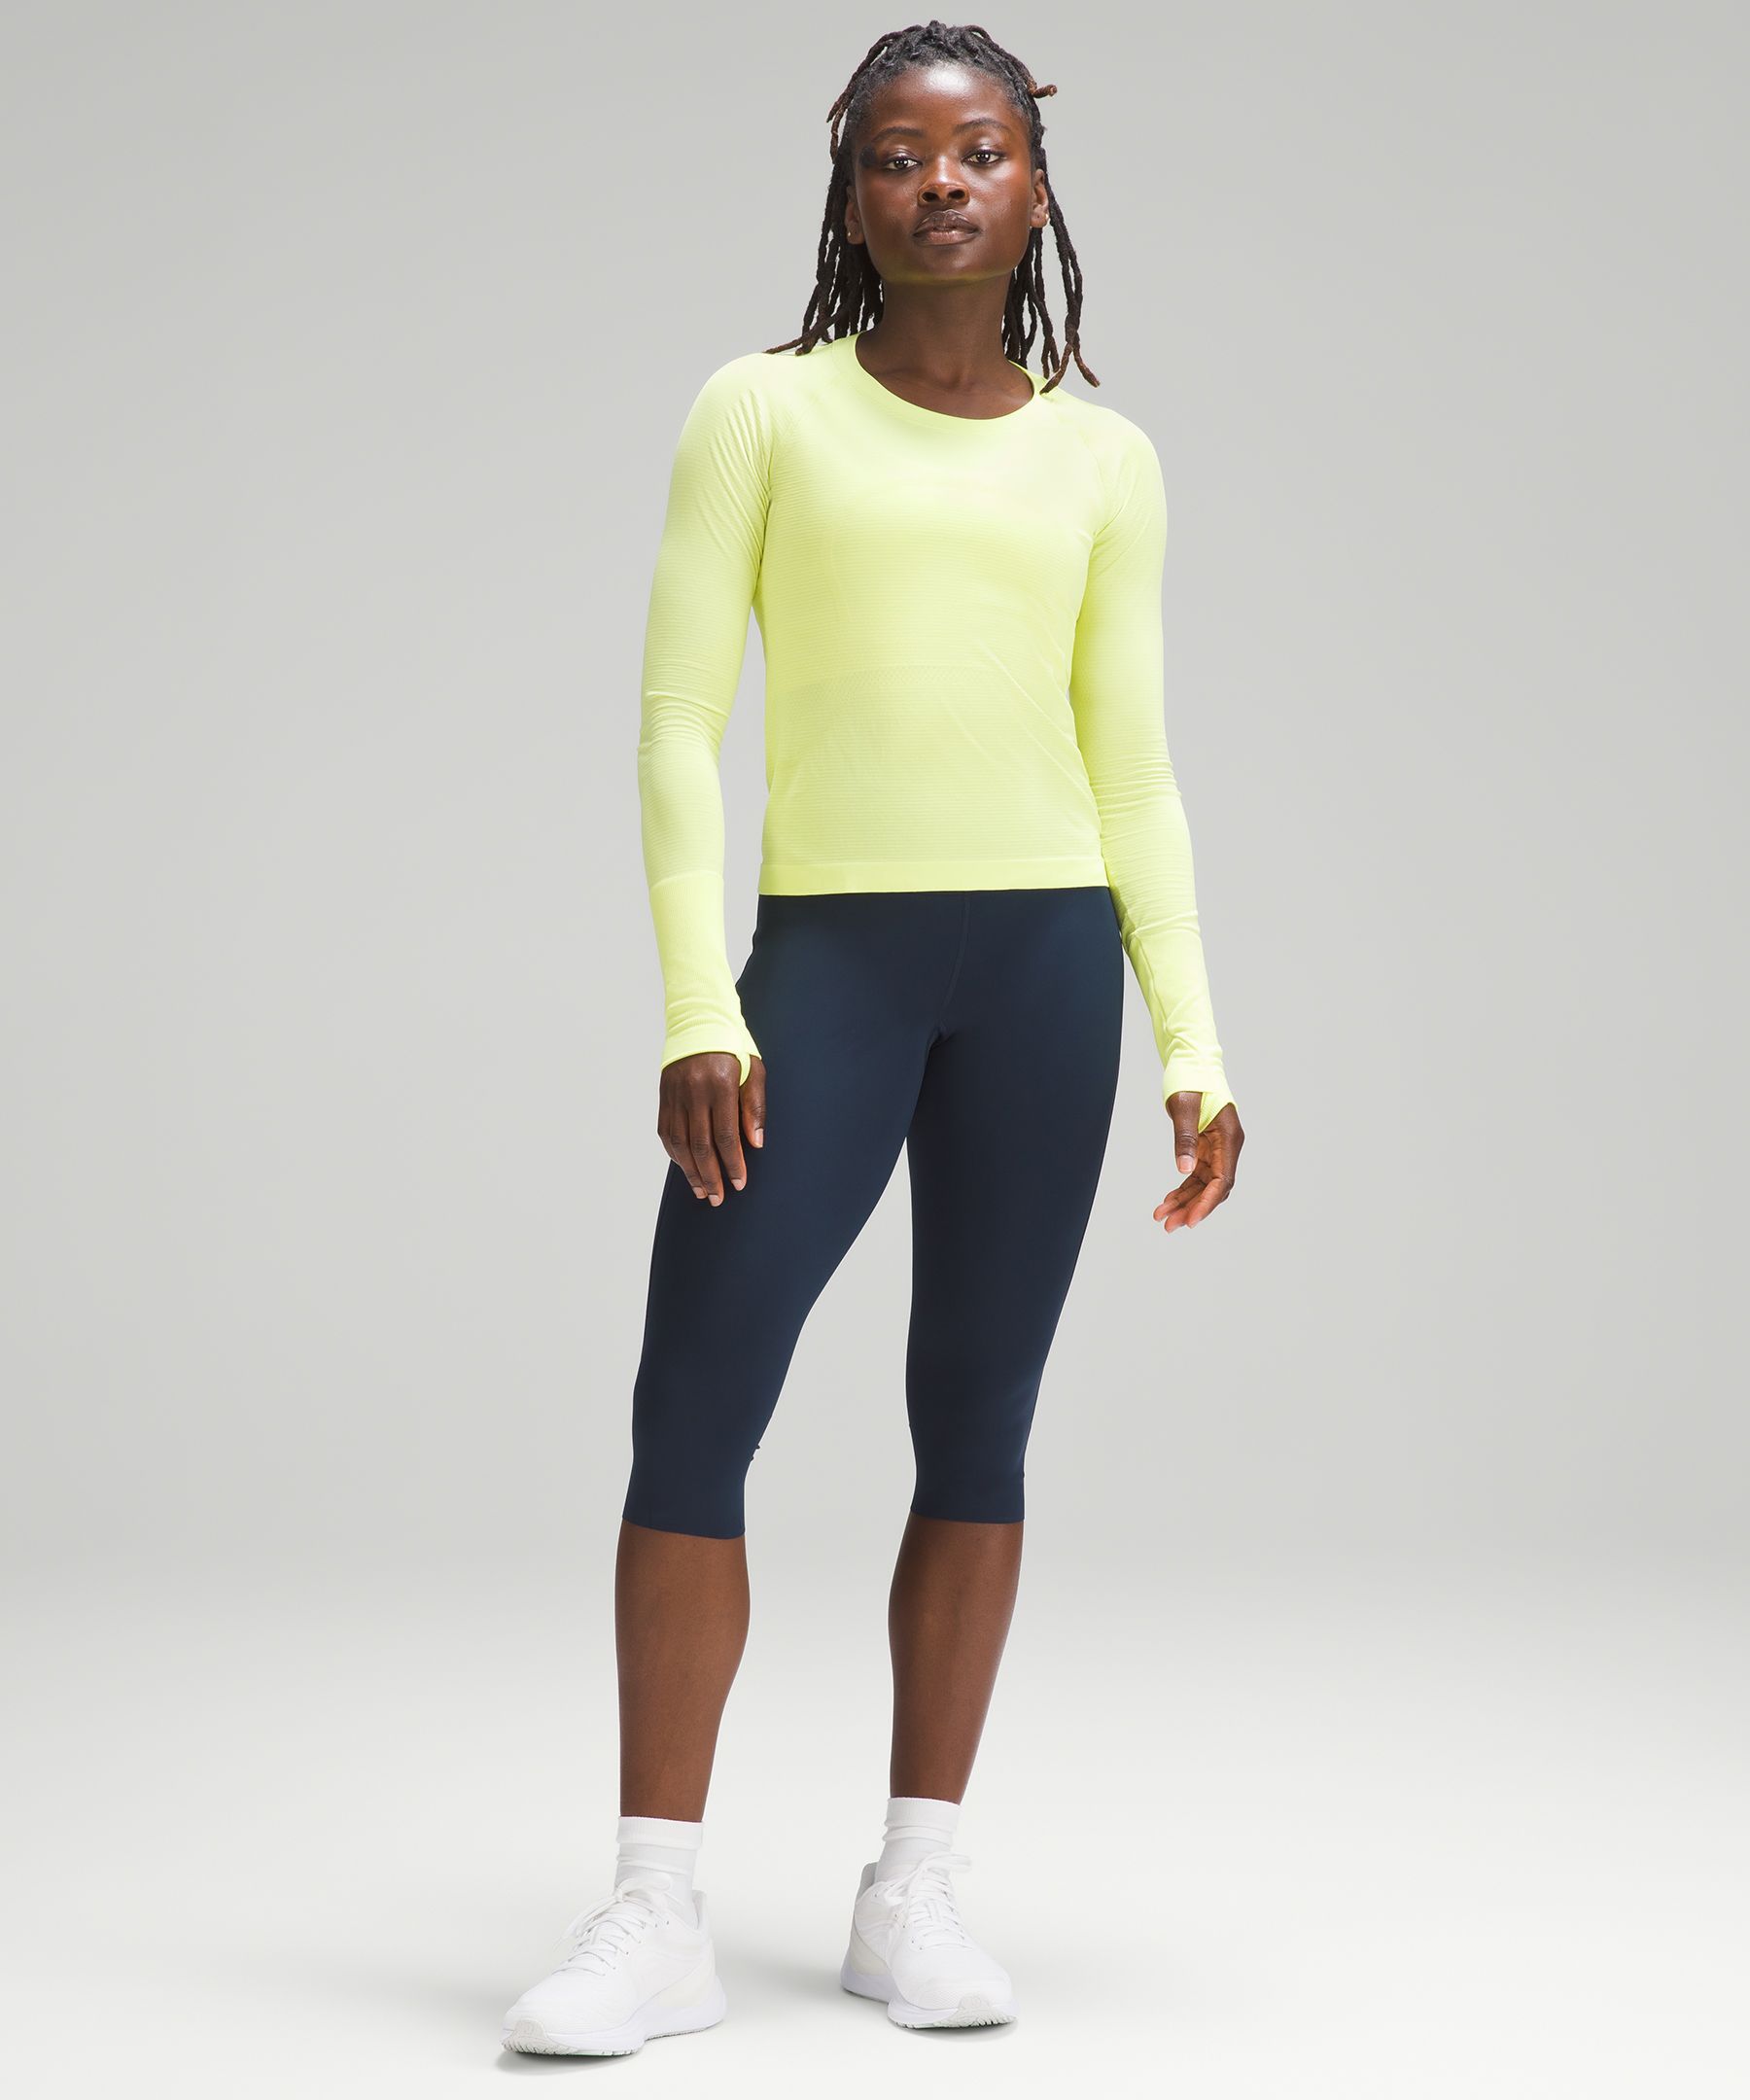 Women'S Clothes  Lululemon CanadaWEBView More Products. Women'S Run,  Training, And Yoga Gear To Keep You